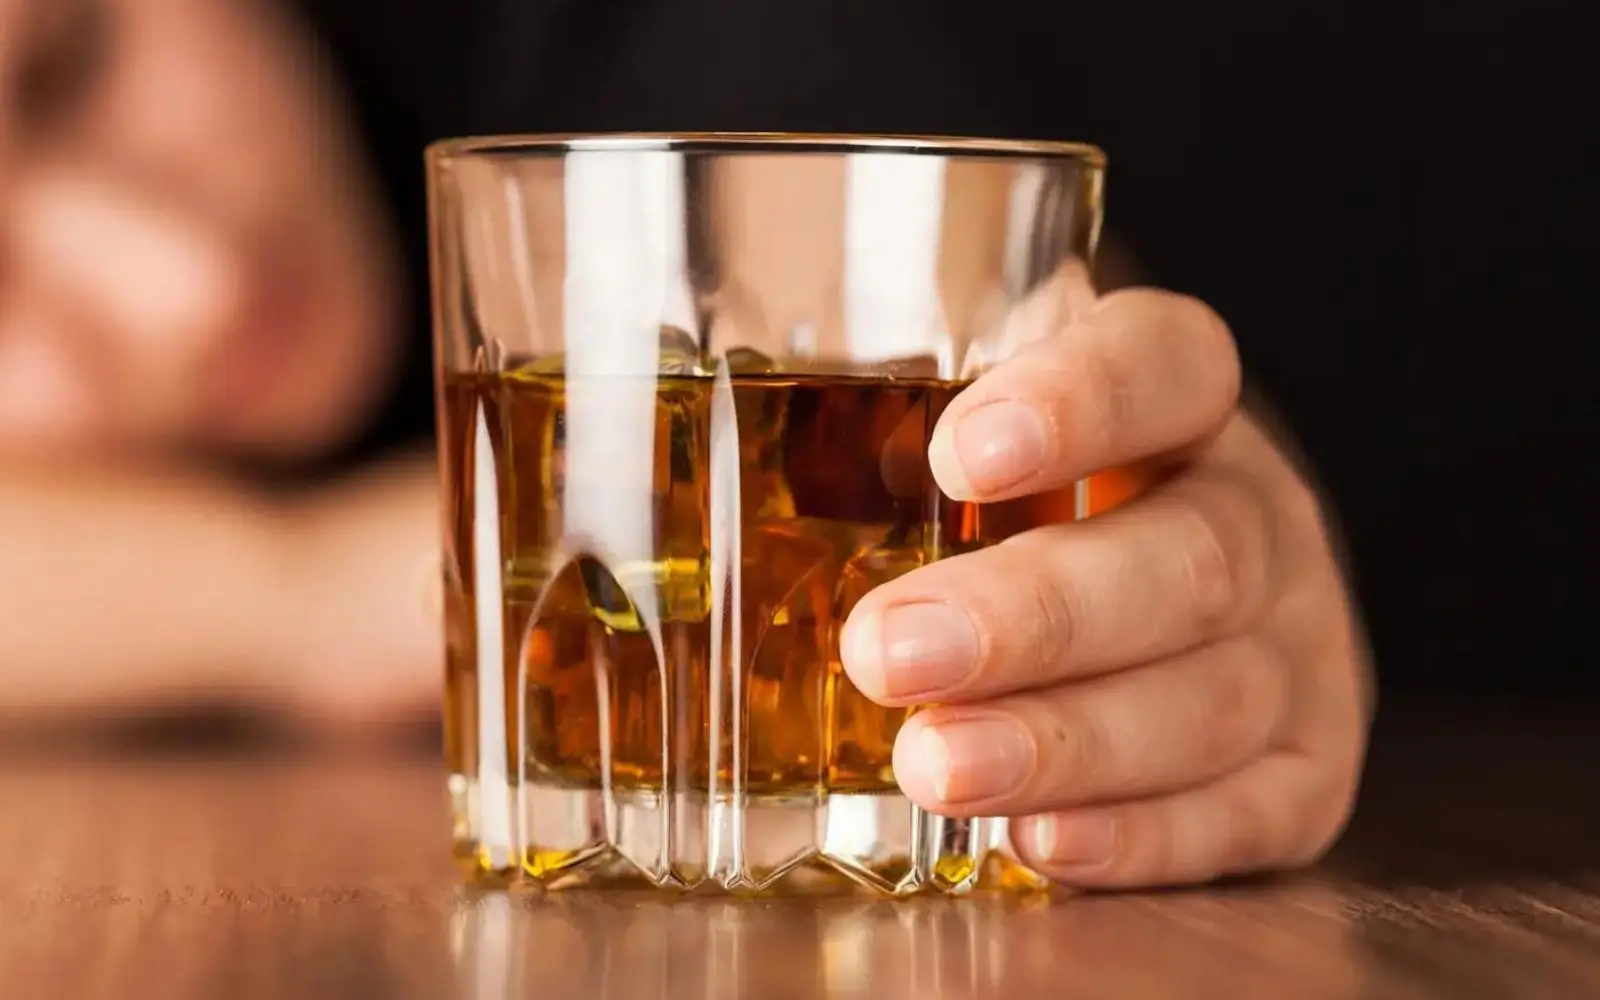 Close-up of a hand holding a whiskey glass with a blurred figure in the background, illustrating the personal impact of alcohol use, relevant in hair alcohol testing